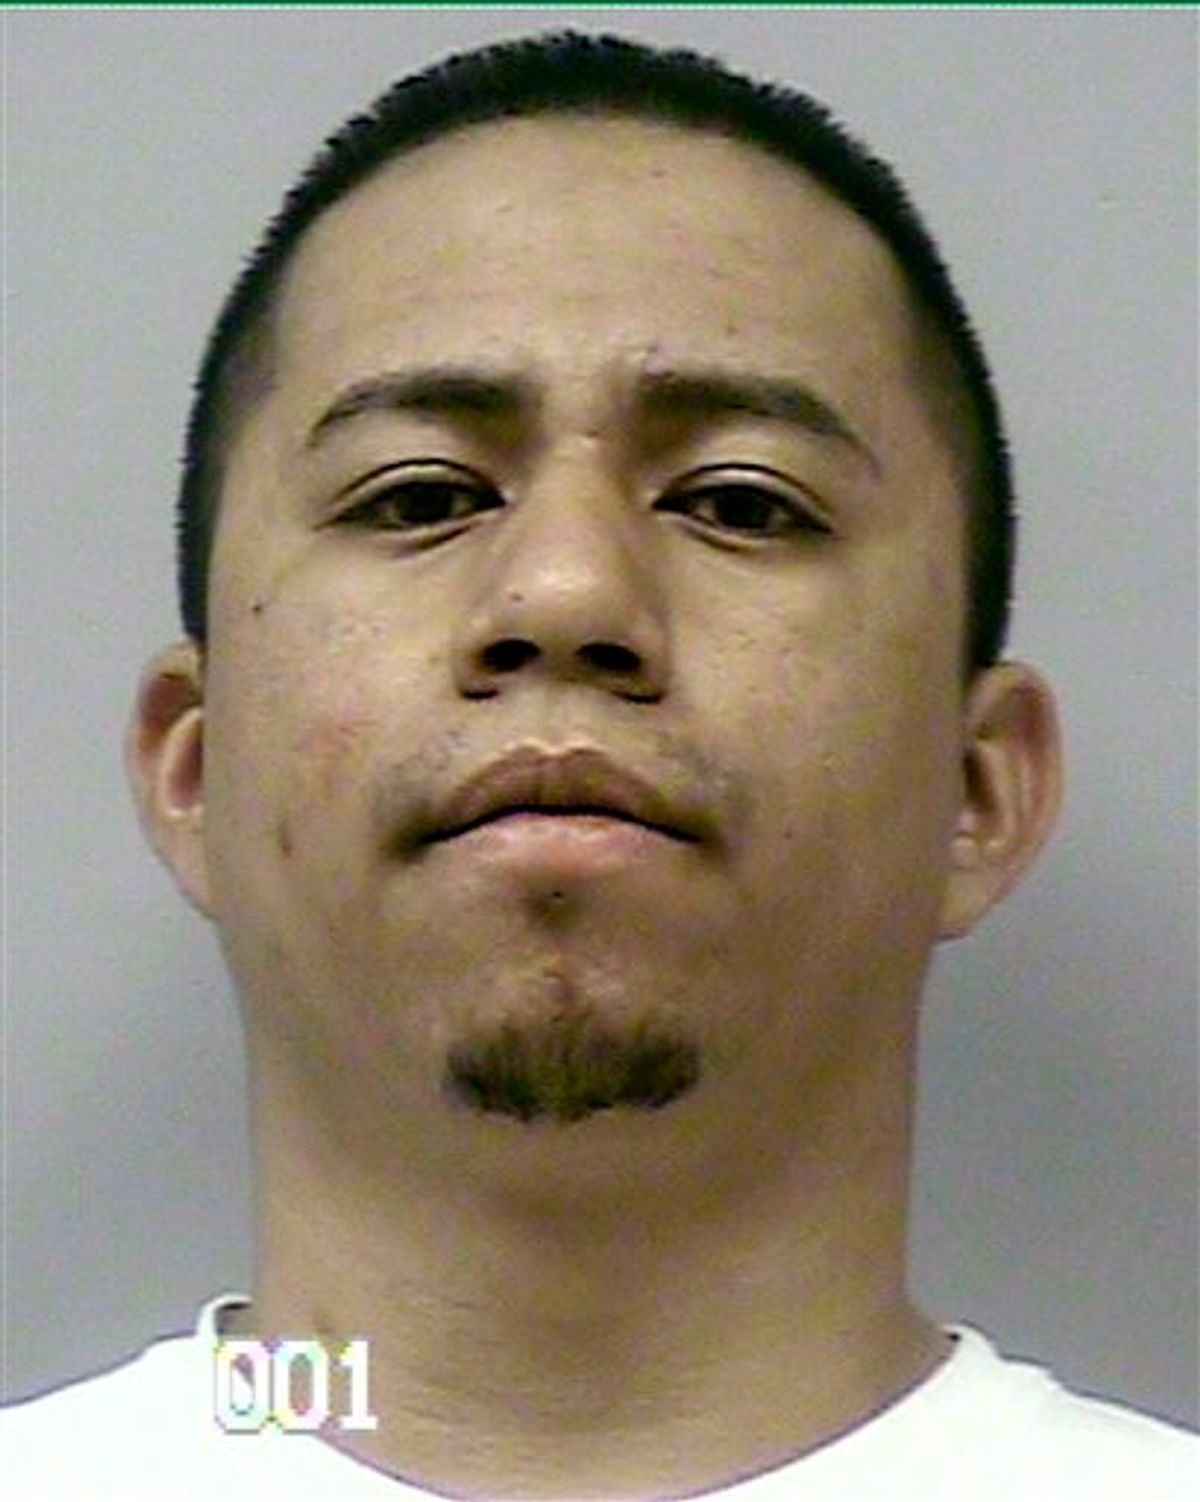 This photo released by Gwinnett Sheriff's Department on Friday, Feb. 18, 201 shows murder suspect Ivan Gonzalez. Gwinnett County authorities say three children died in a fire that appears to have been caused by chemicals used to make methamphetamine. Gwinnett County police Cpl. Jake Smith says police are seeking 26-year-old Ivan Gonzalez, who has been charged with three counts of murder in the deaths of the children. (AP Photo/Gwinnett County Sheriff's Department) (AP)